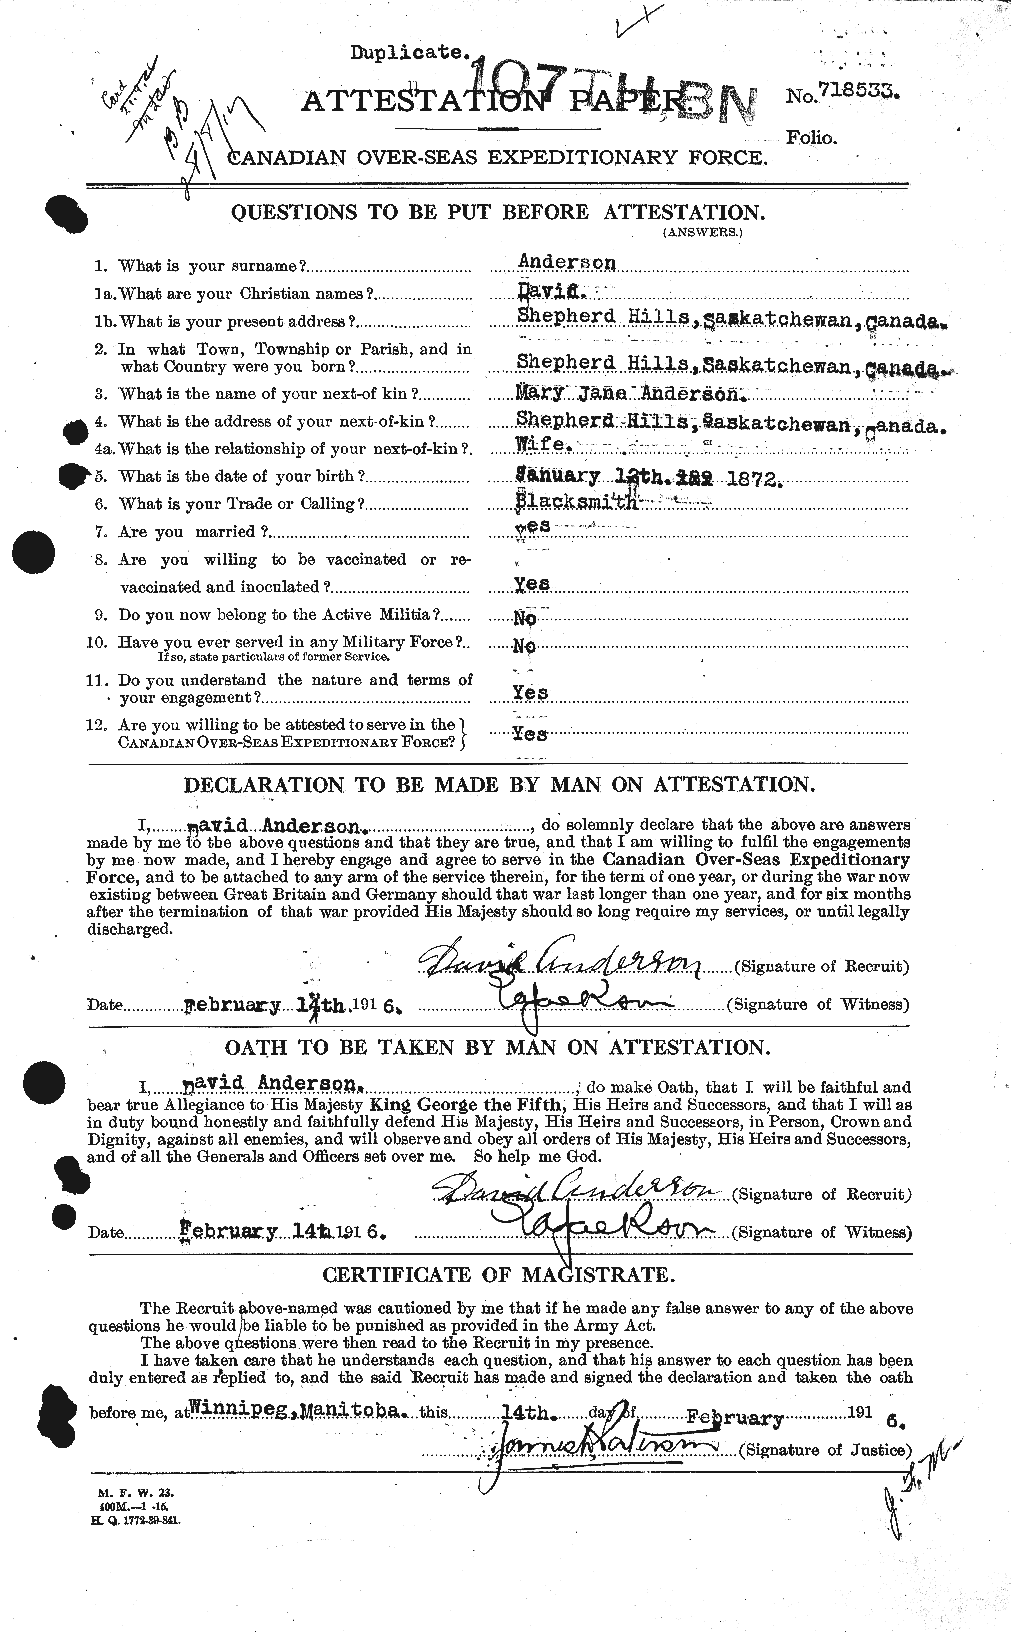 Personnel Records of the First World War - CEF 210021a